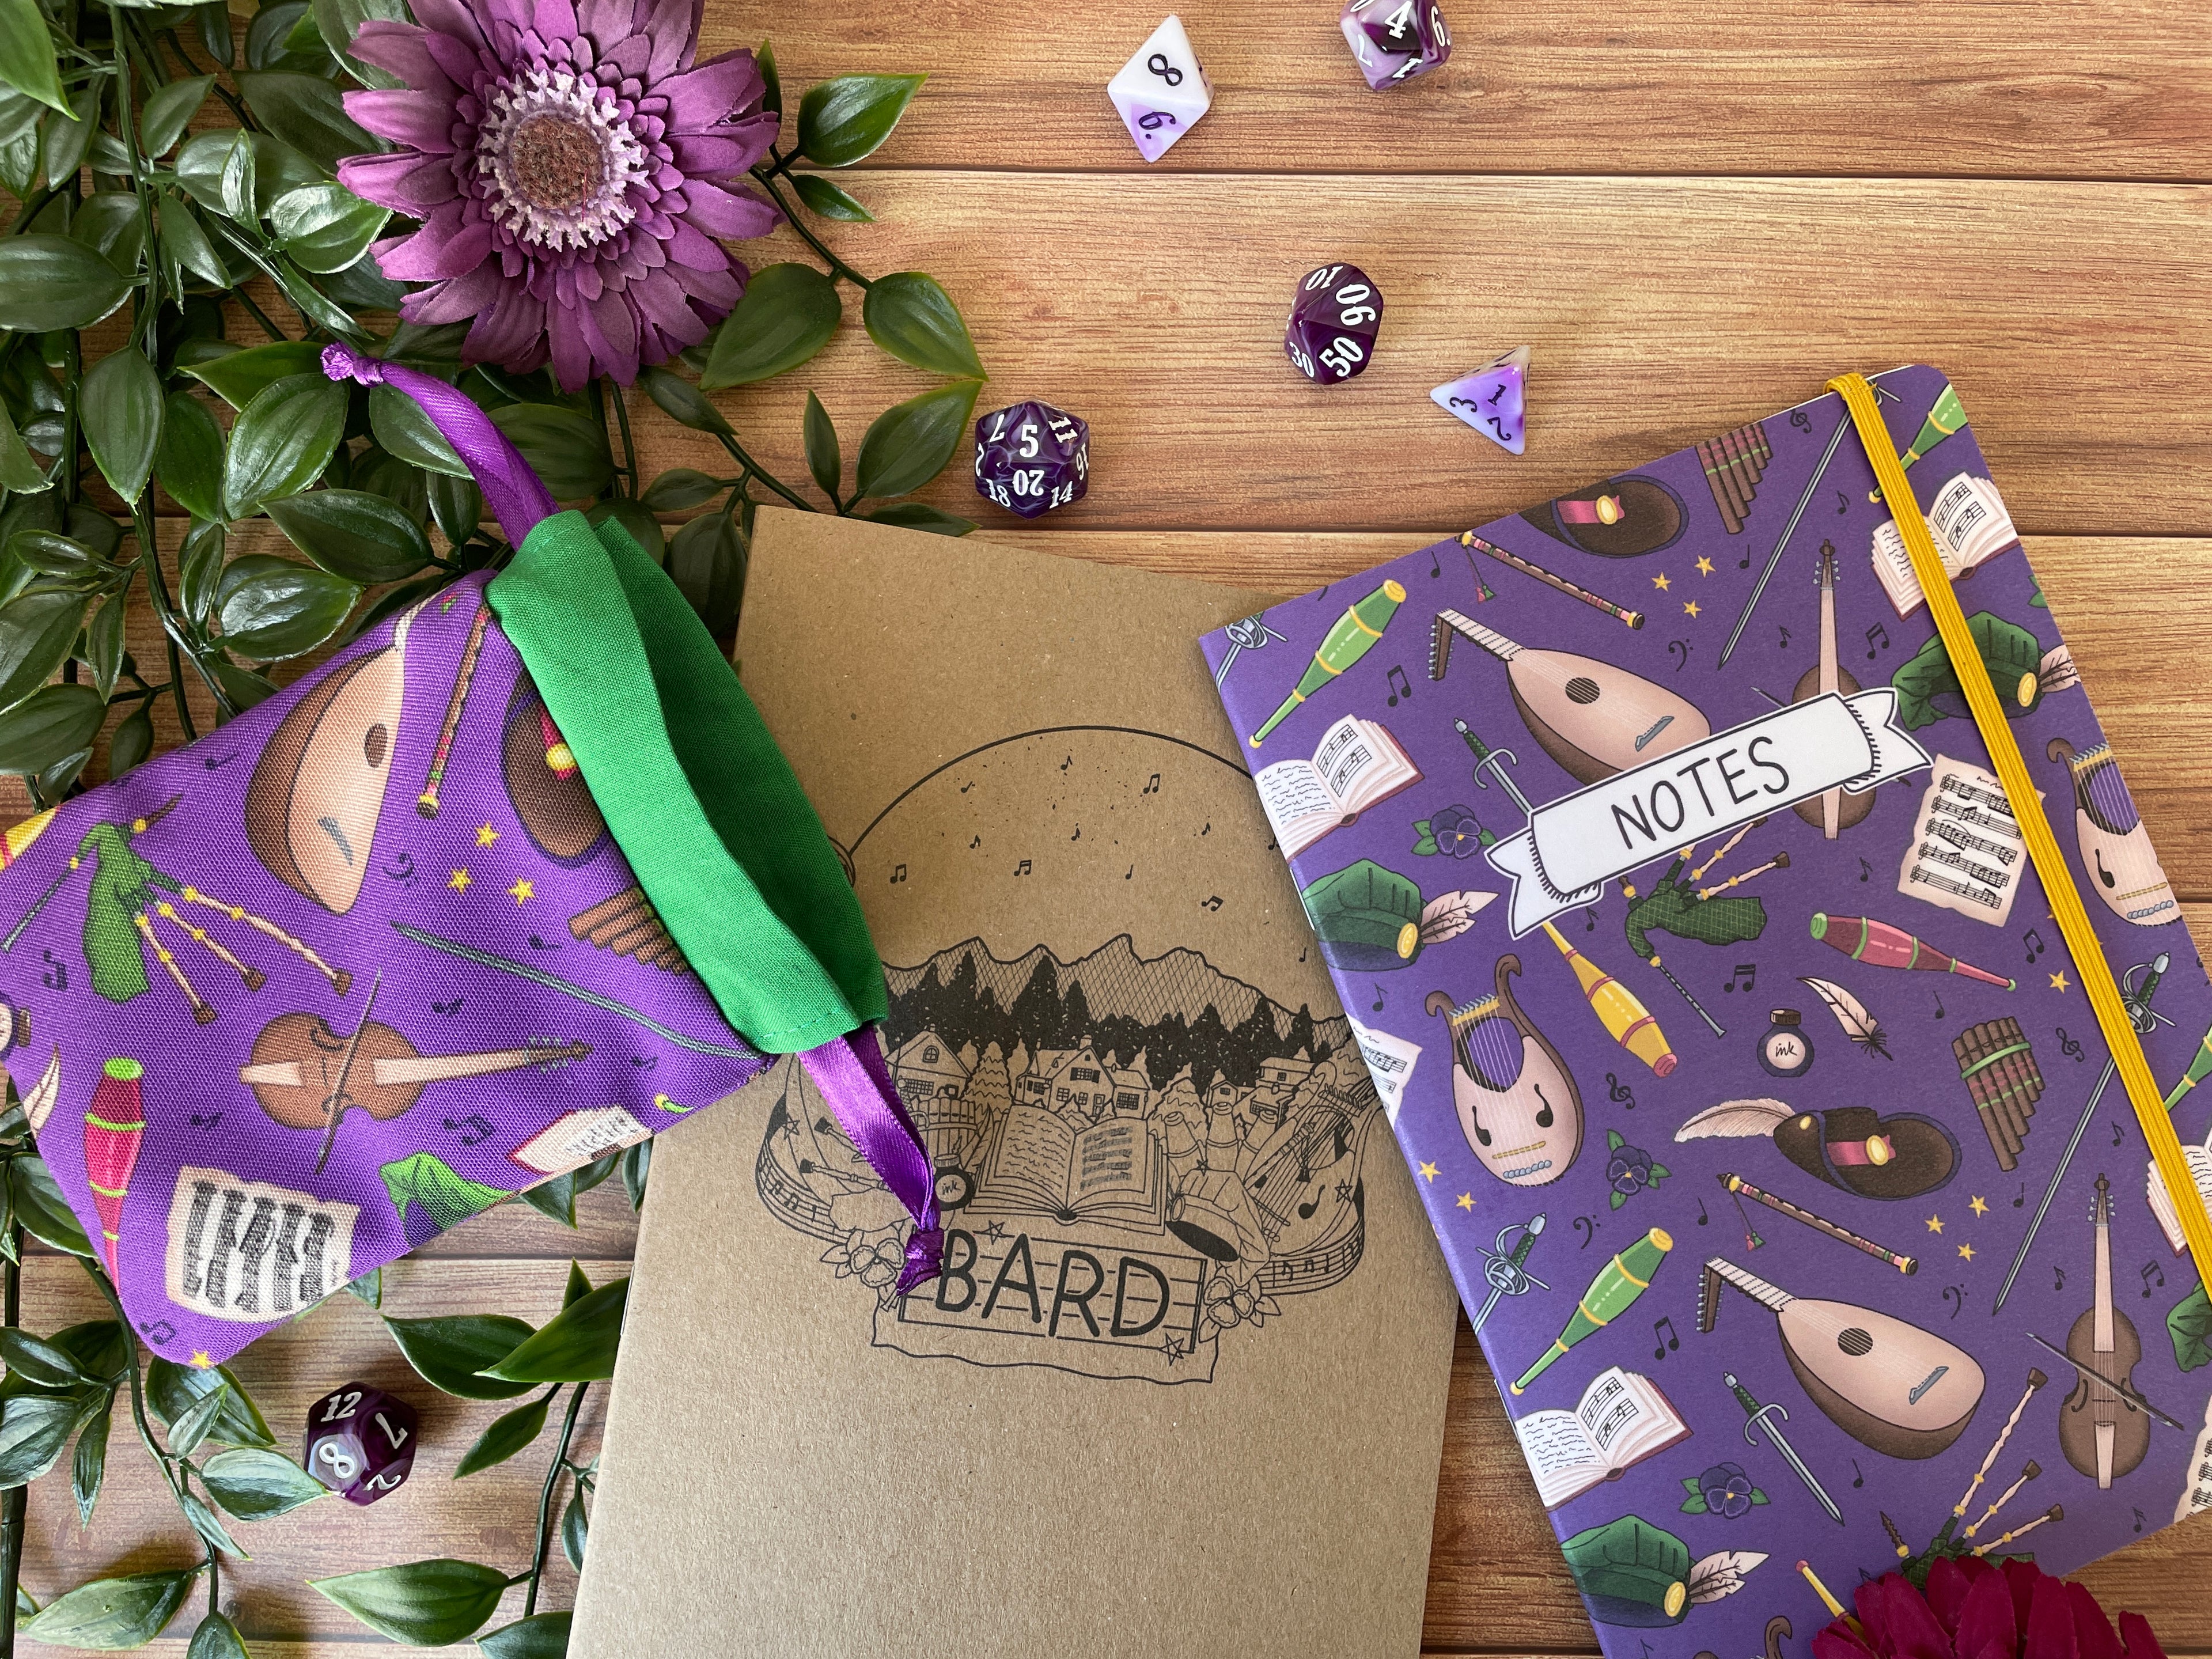 Image features books and dice bags from our bard collection which is designed for music lovers and entertainers. The design features musical instruments, hats, weapons and juggling pins in shades of browns, greens and yellows on a purple background.